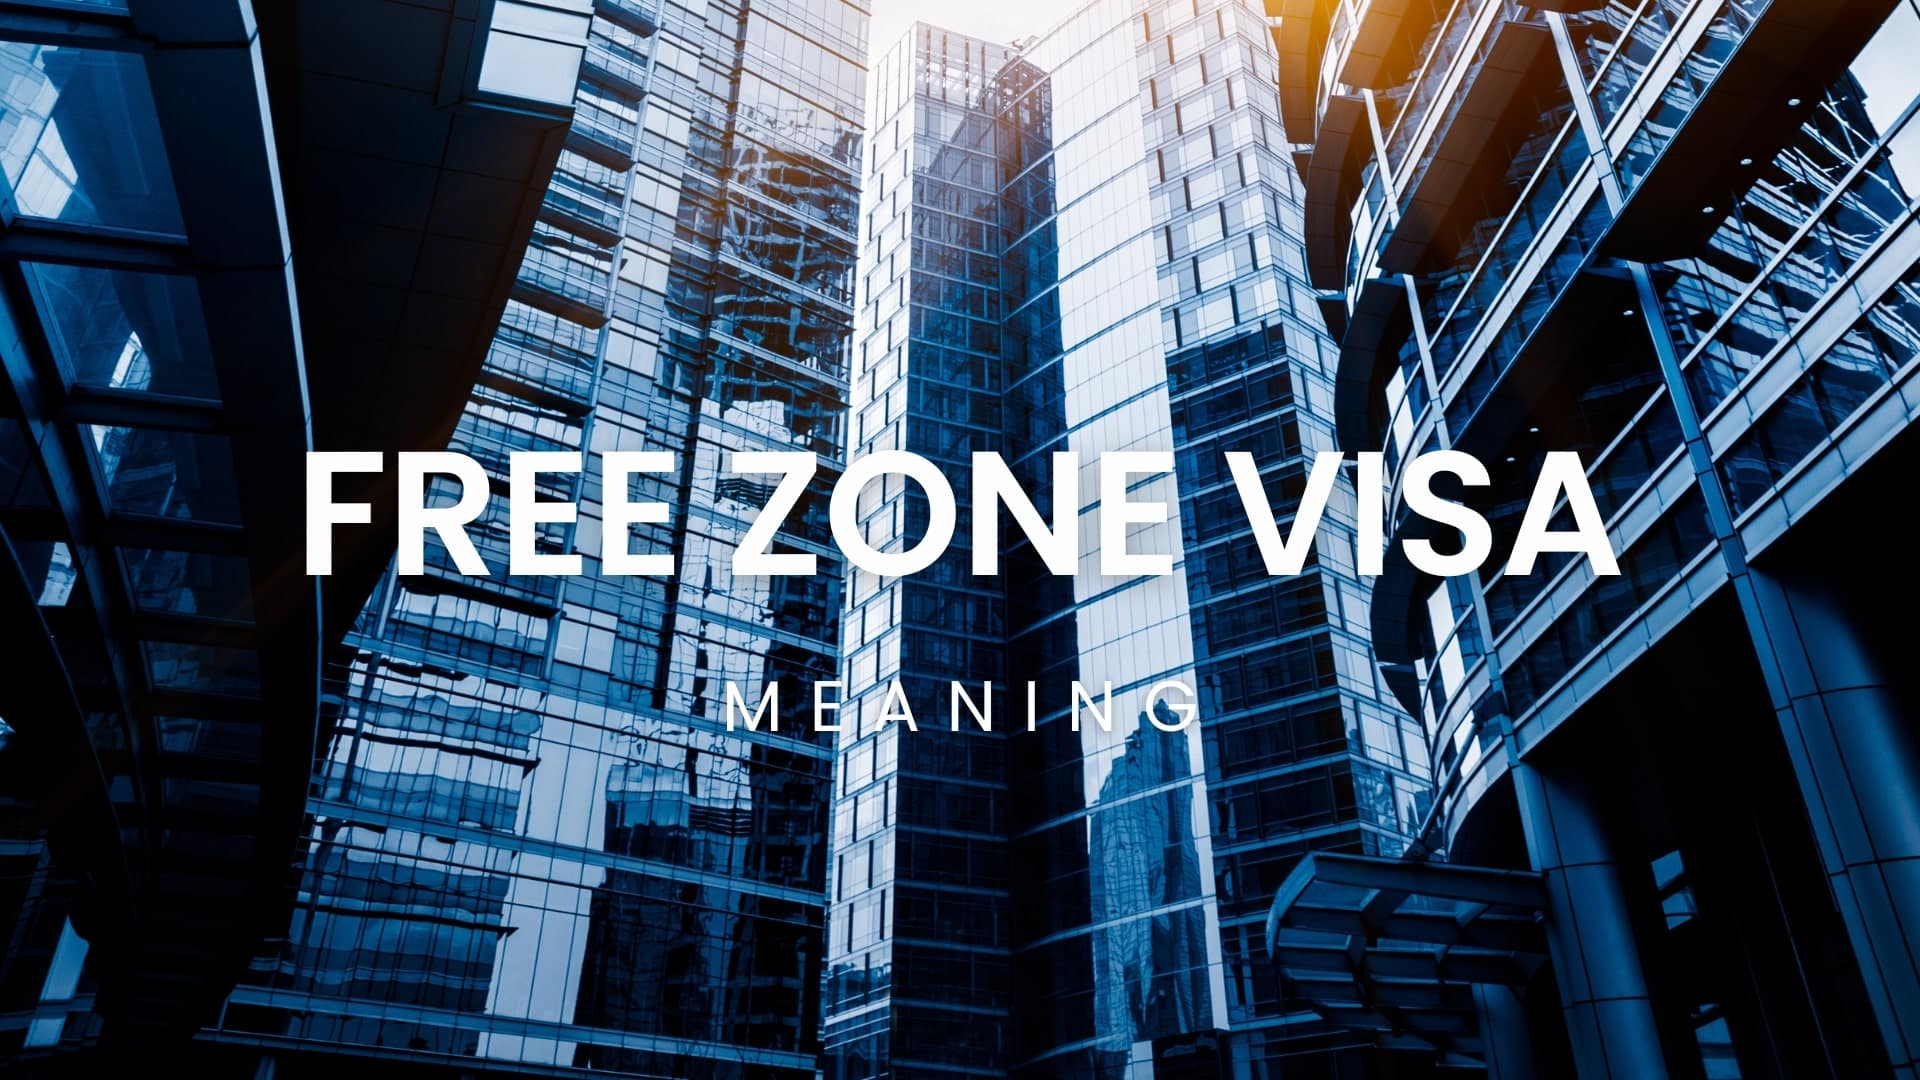 free zone visa meaning